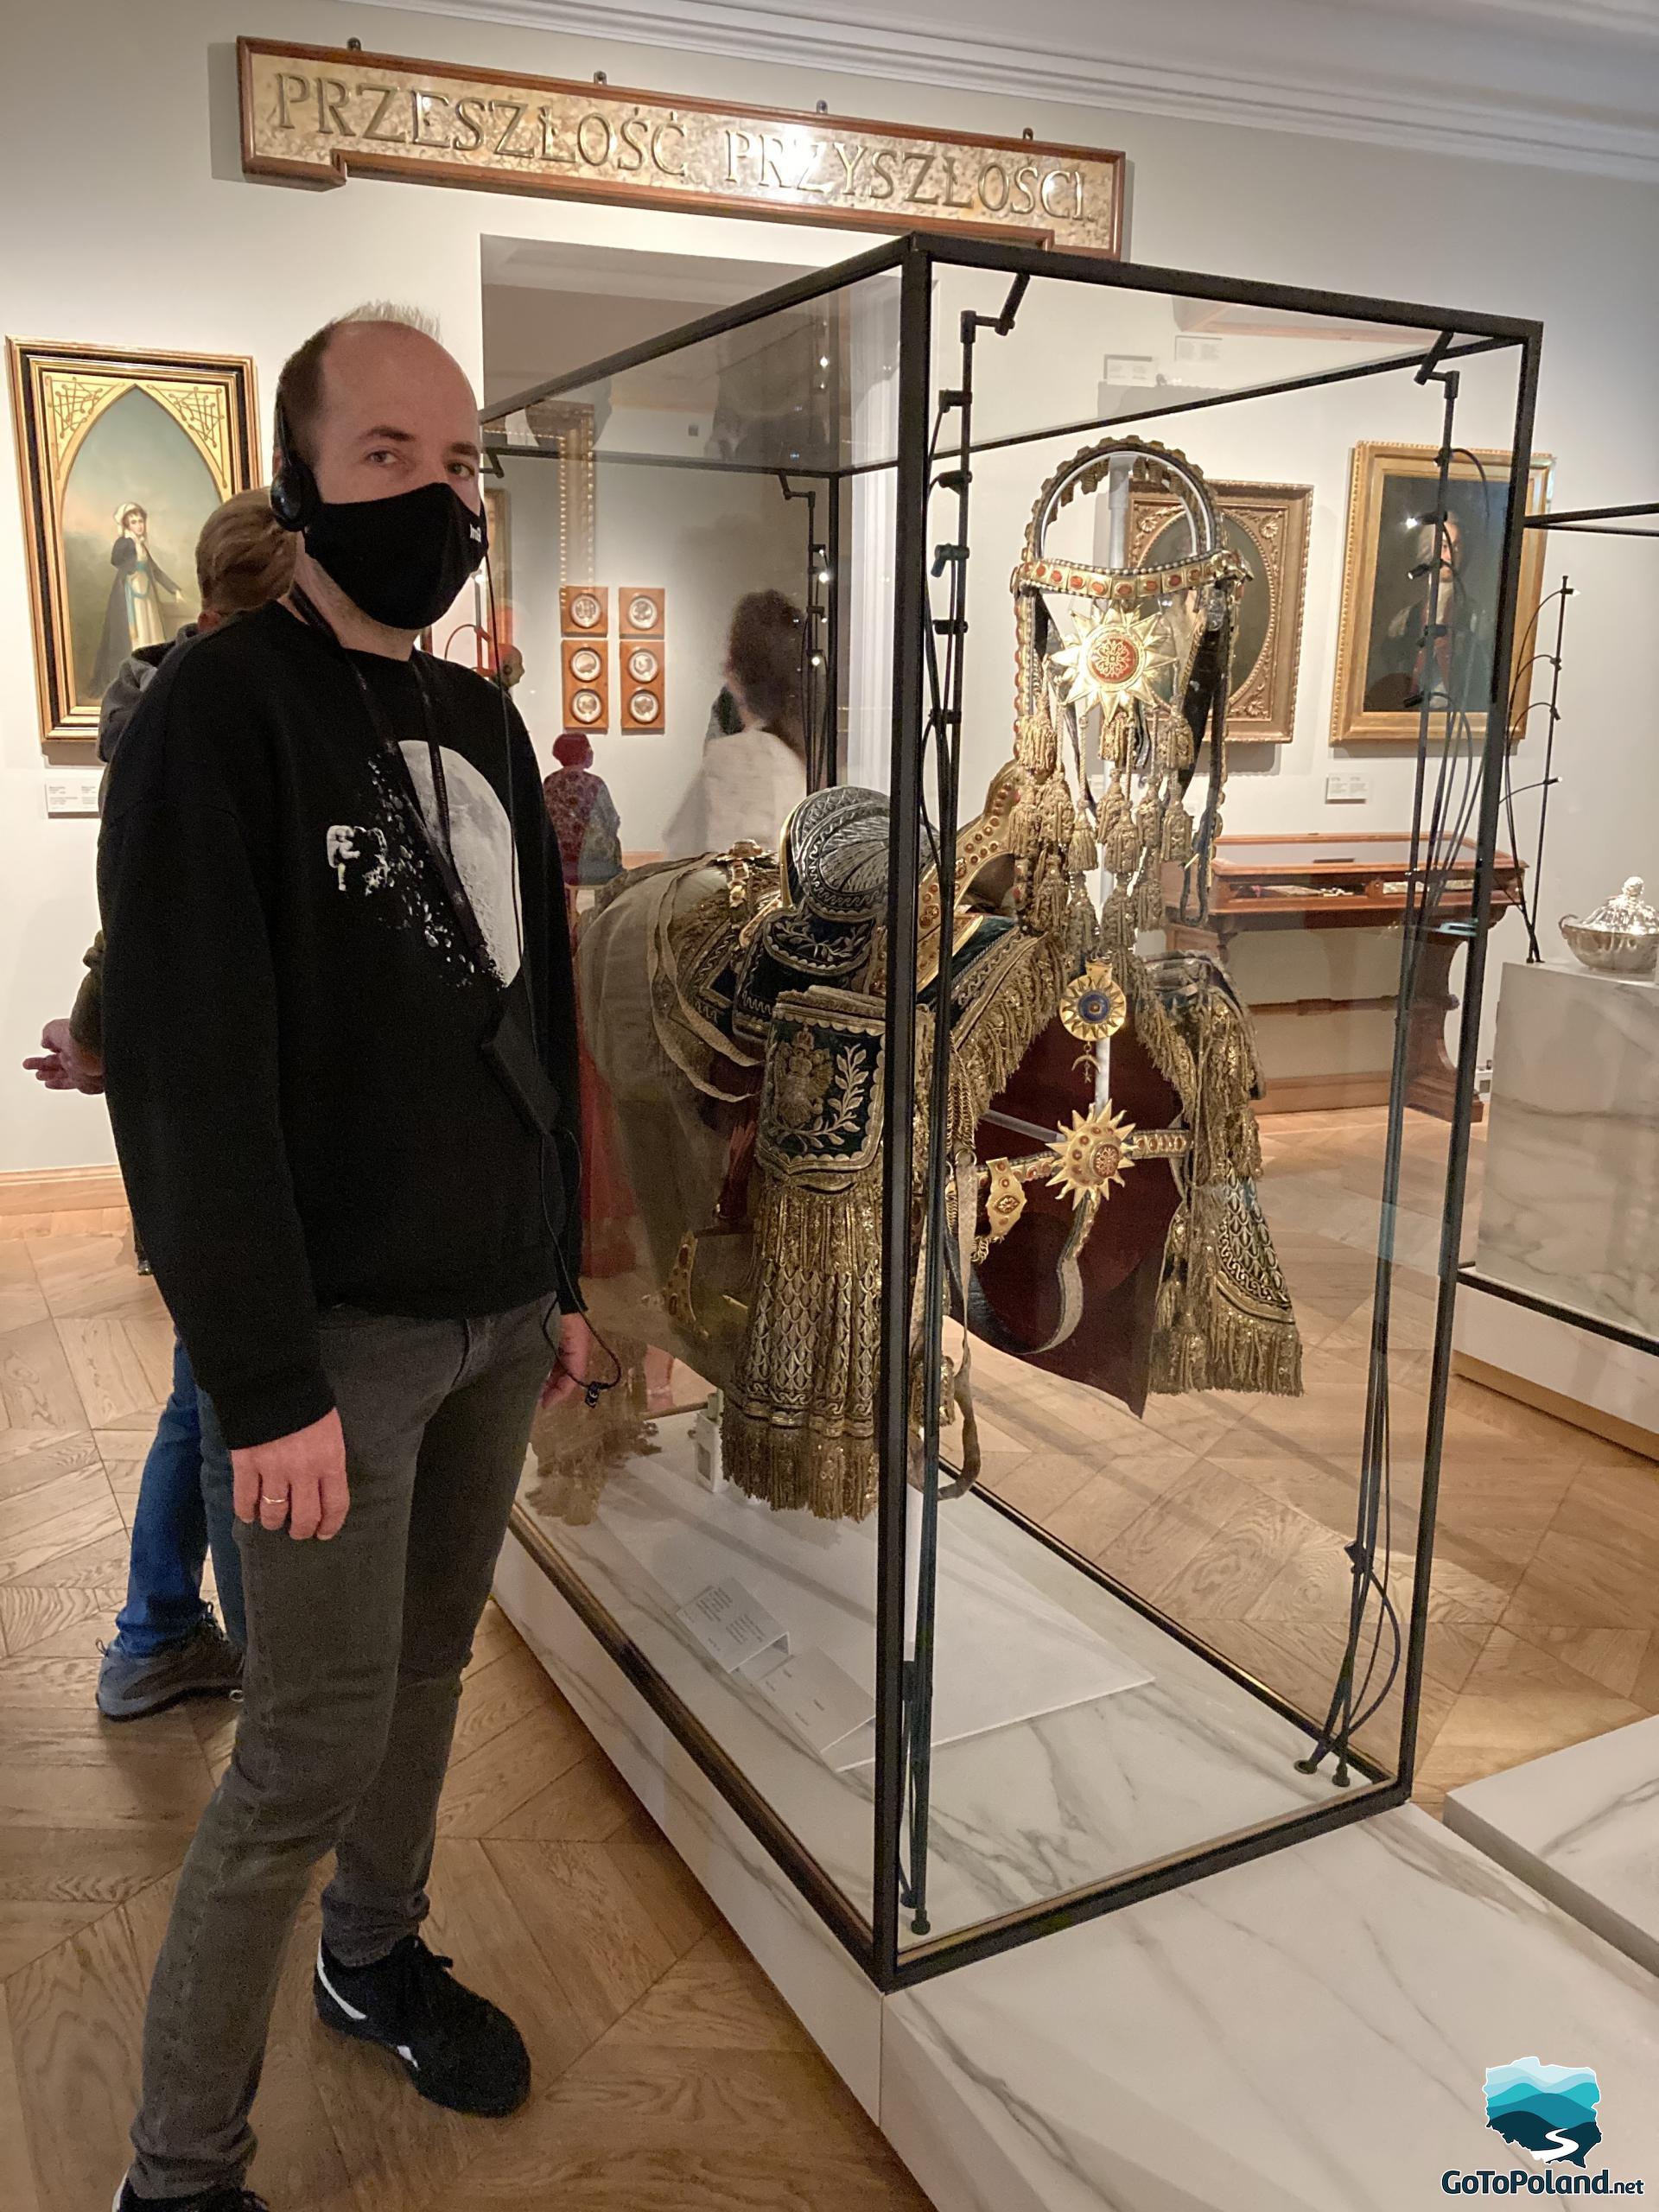 A man is standing next to the exhibit. This is a very decorative saddle maybe from the 16th or 17th century placed behind glass